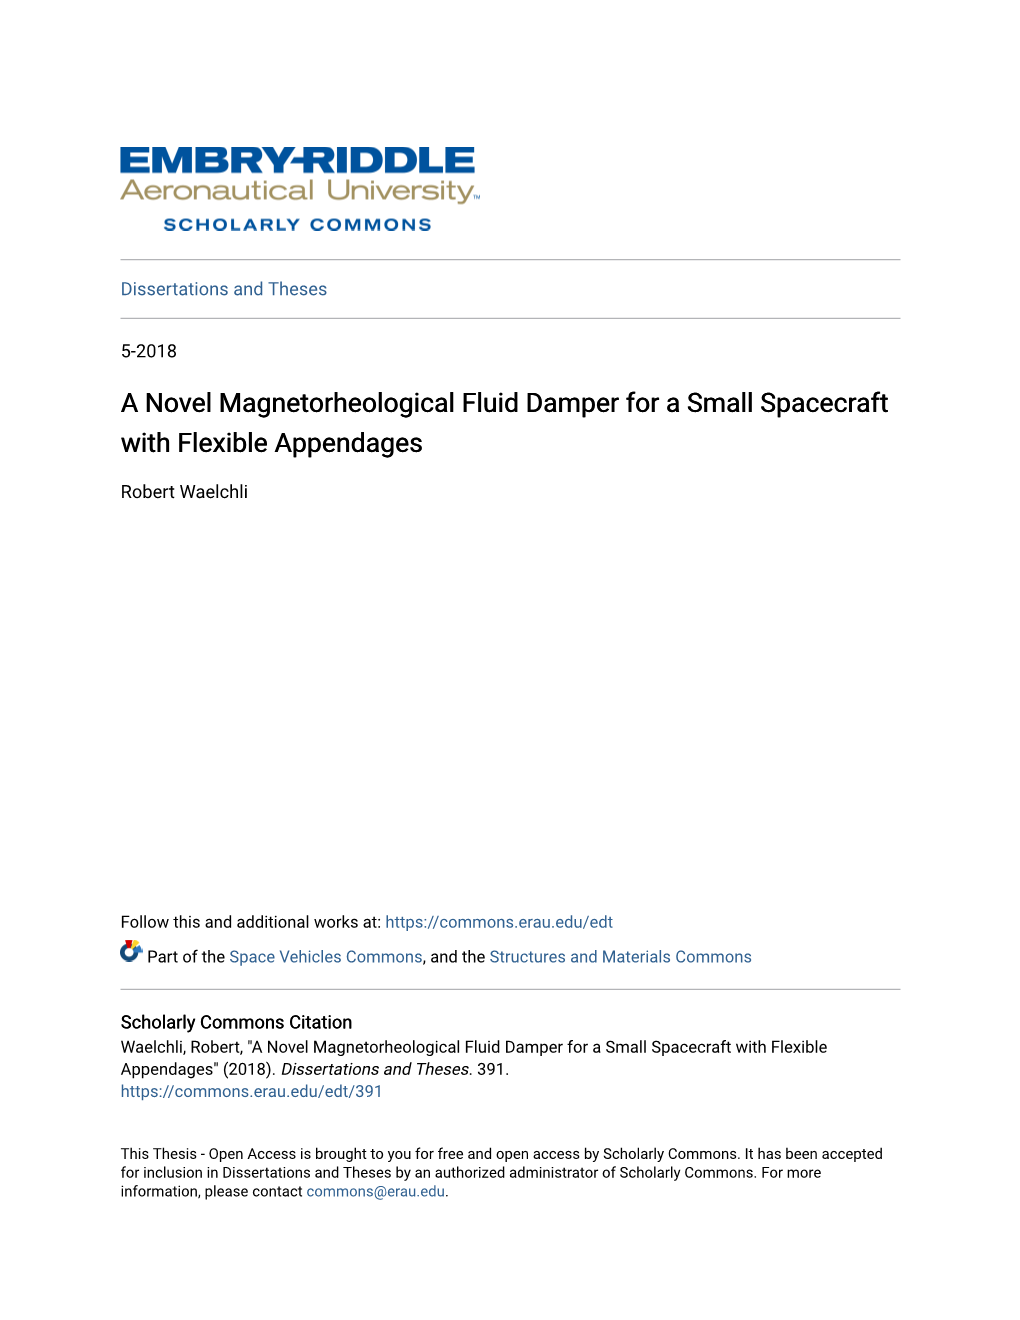 A Novel Magnetorheological Fluid Damper for a Small Spacecraft with Flexible Appendages